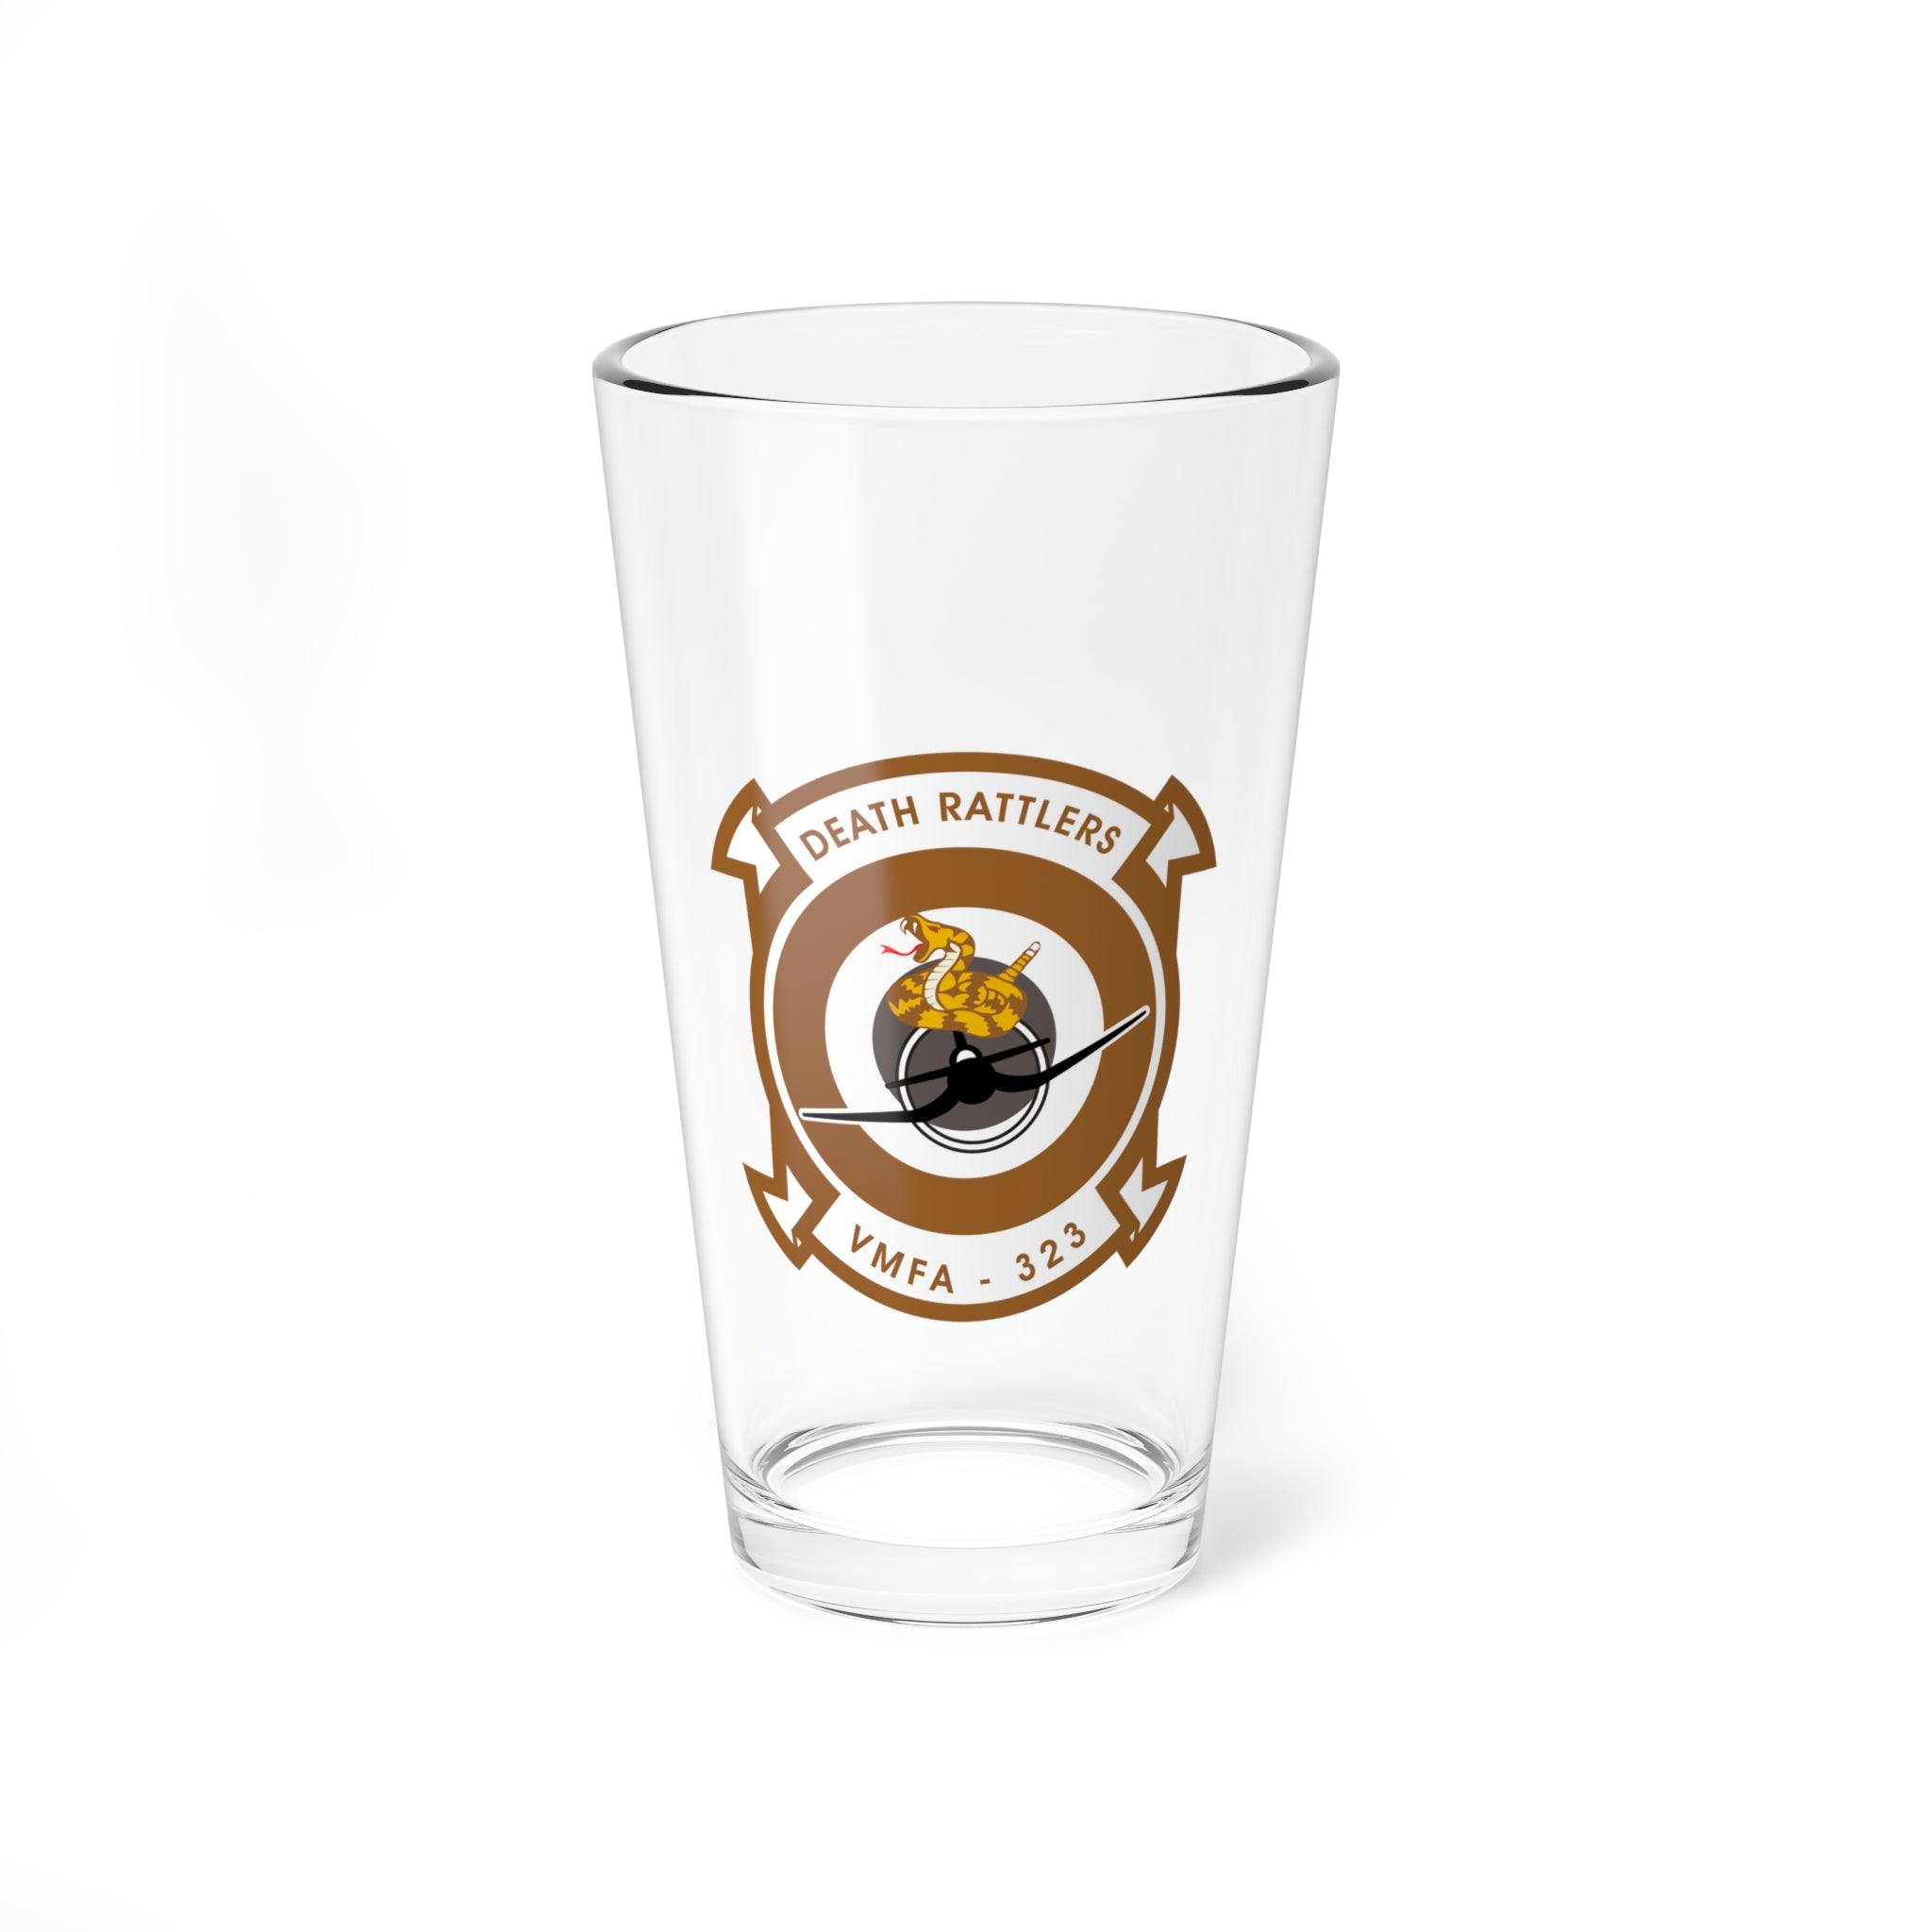 VMFA-323 "Death Rattlers" -no wings- Pint Glass, 16oz, Marine Corps Fighter Attack Squadron